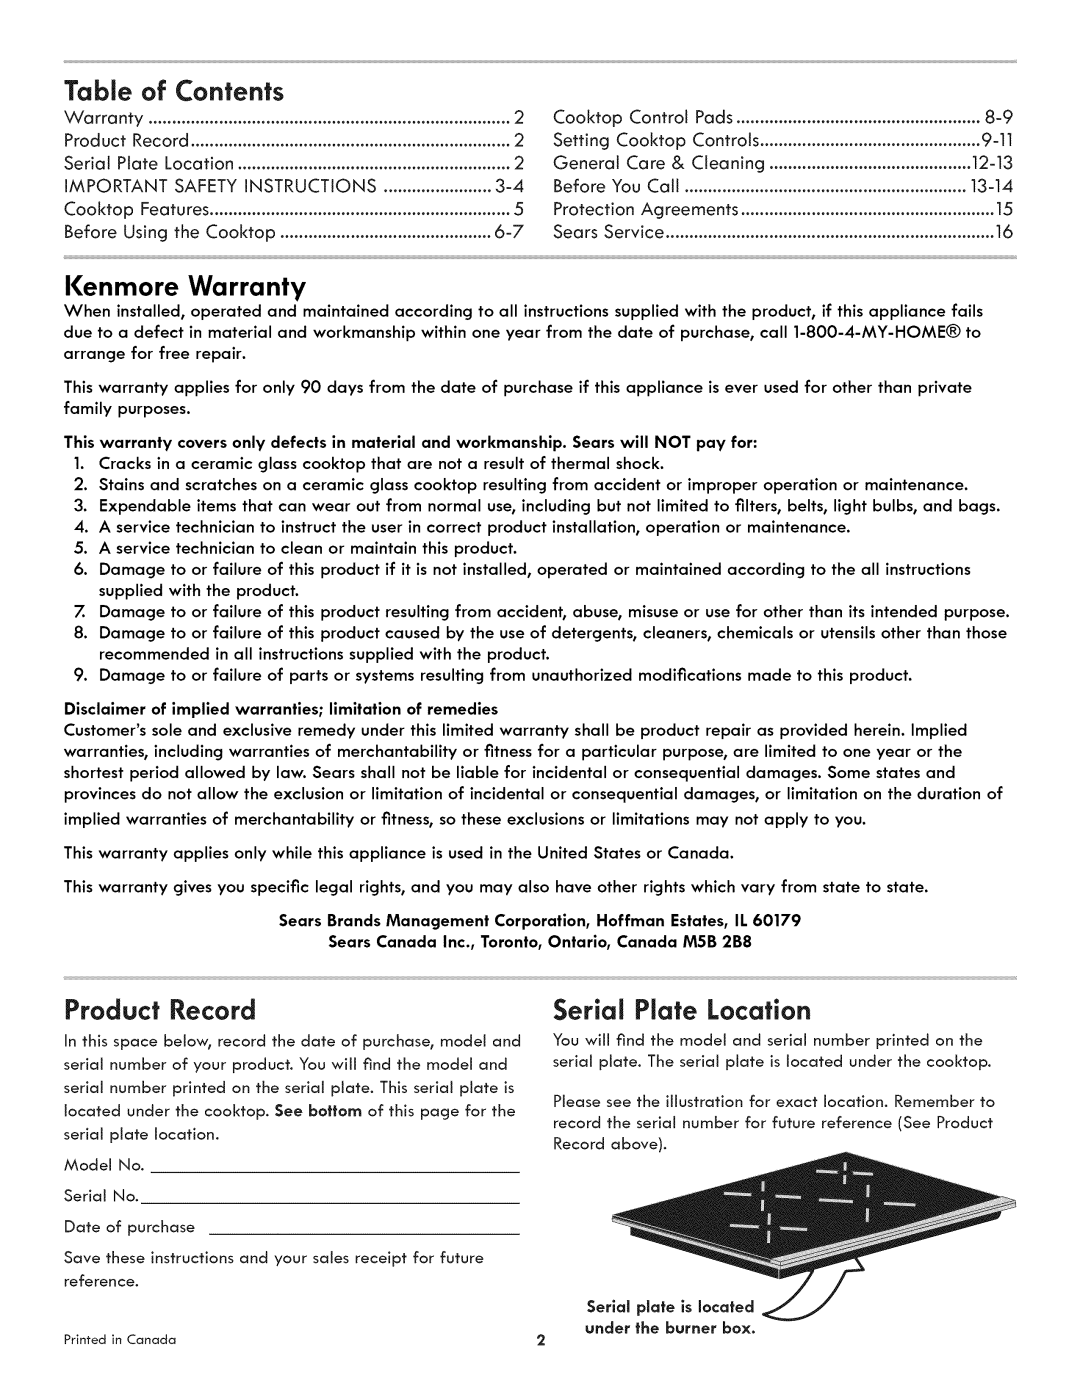 Kenmore 790.4392*, 790.4382* manual Table of Contents, Kenmore Warranty, Product Record, Serial Plate Location 